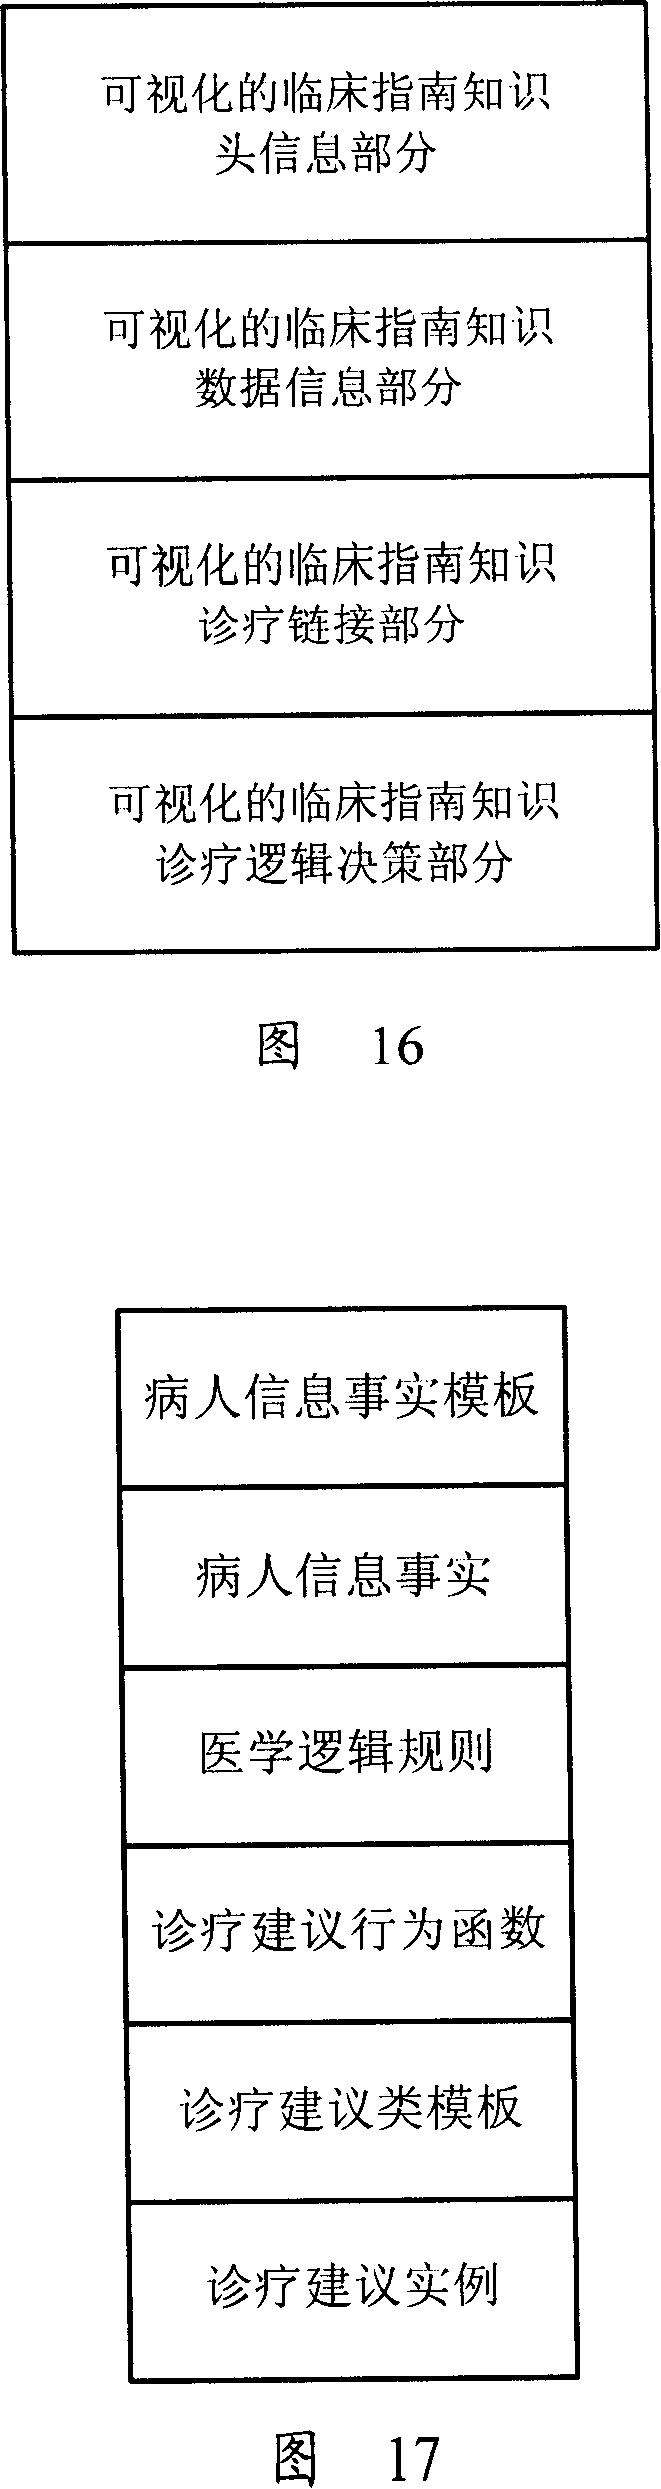 Multi-mode clinic guidance knowledge management system supporting visual editing